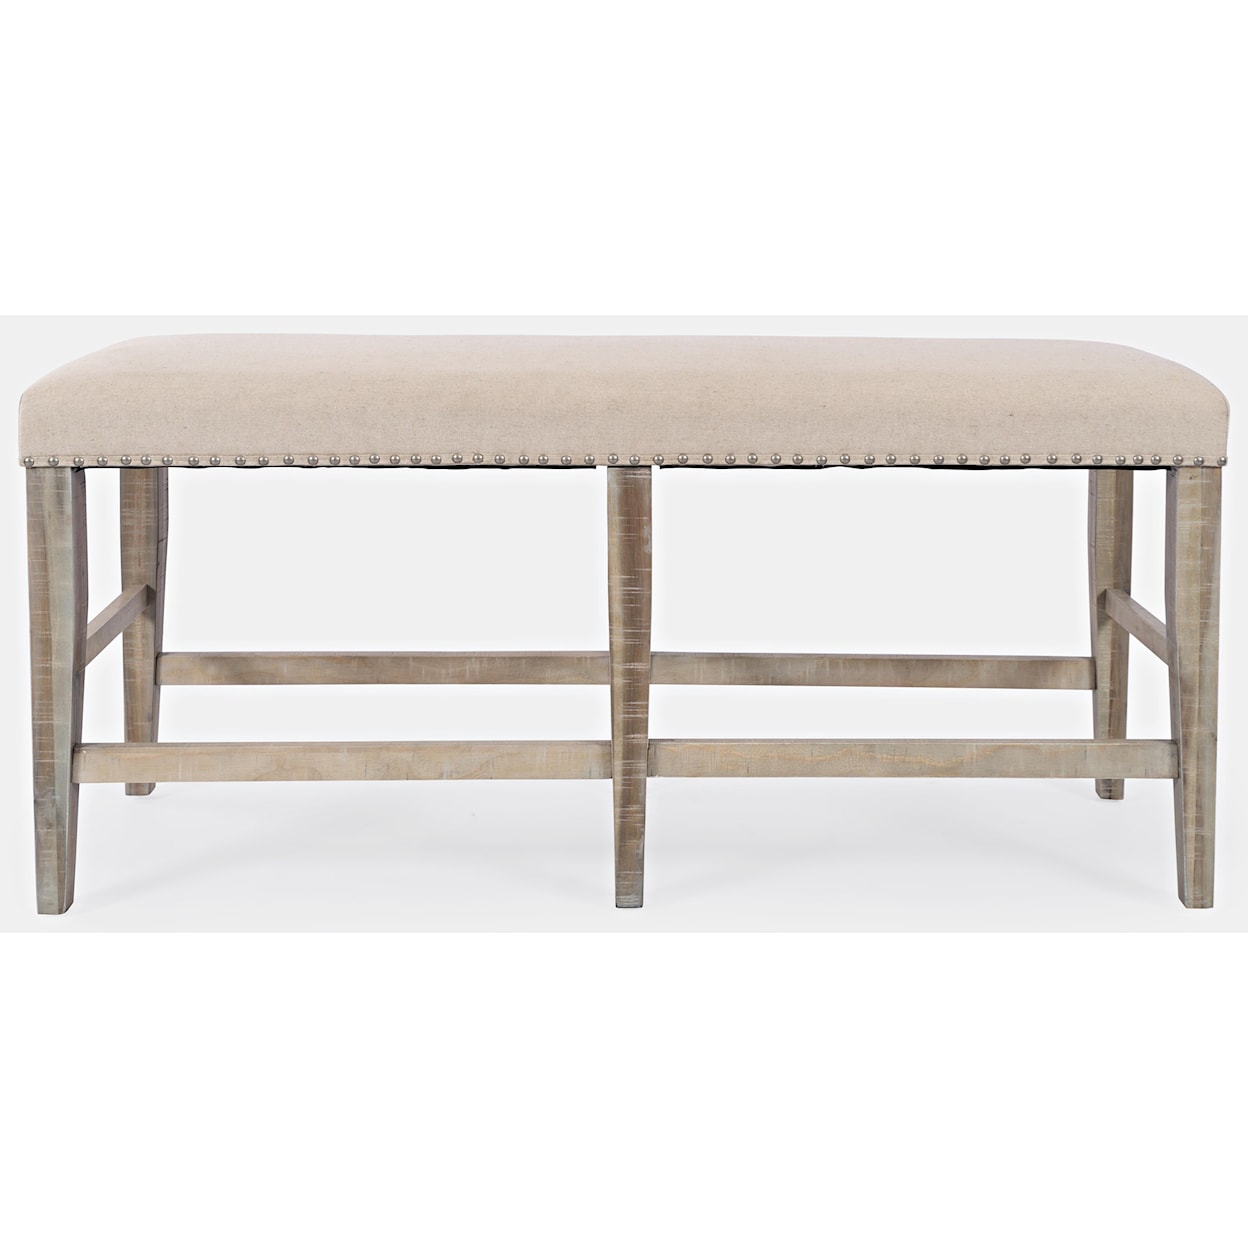 Jofran Fairview Backless Counter Bench